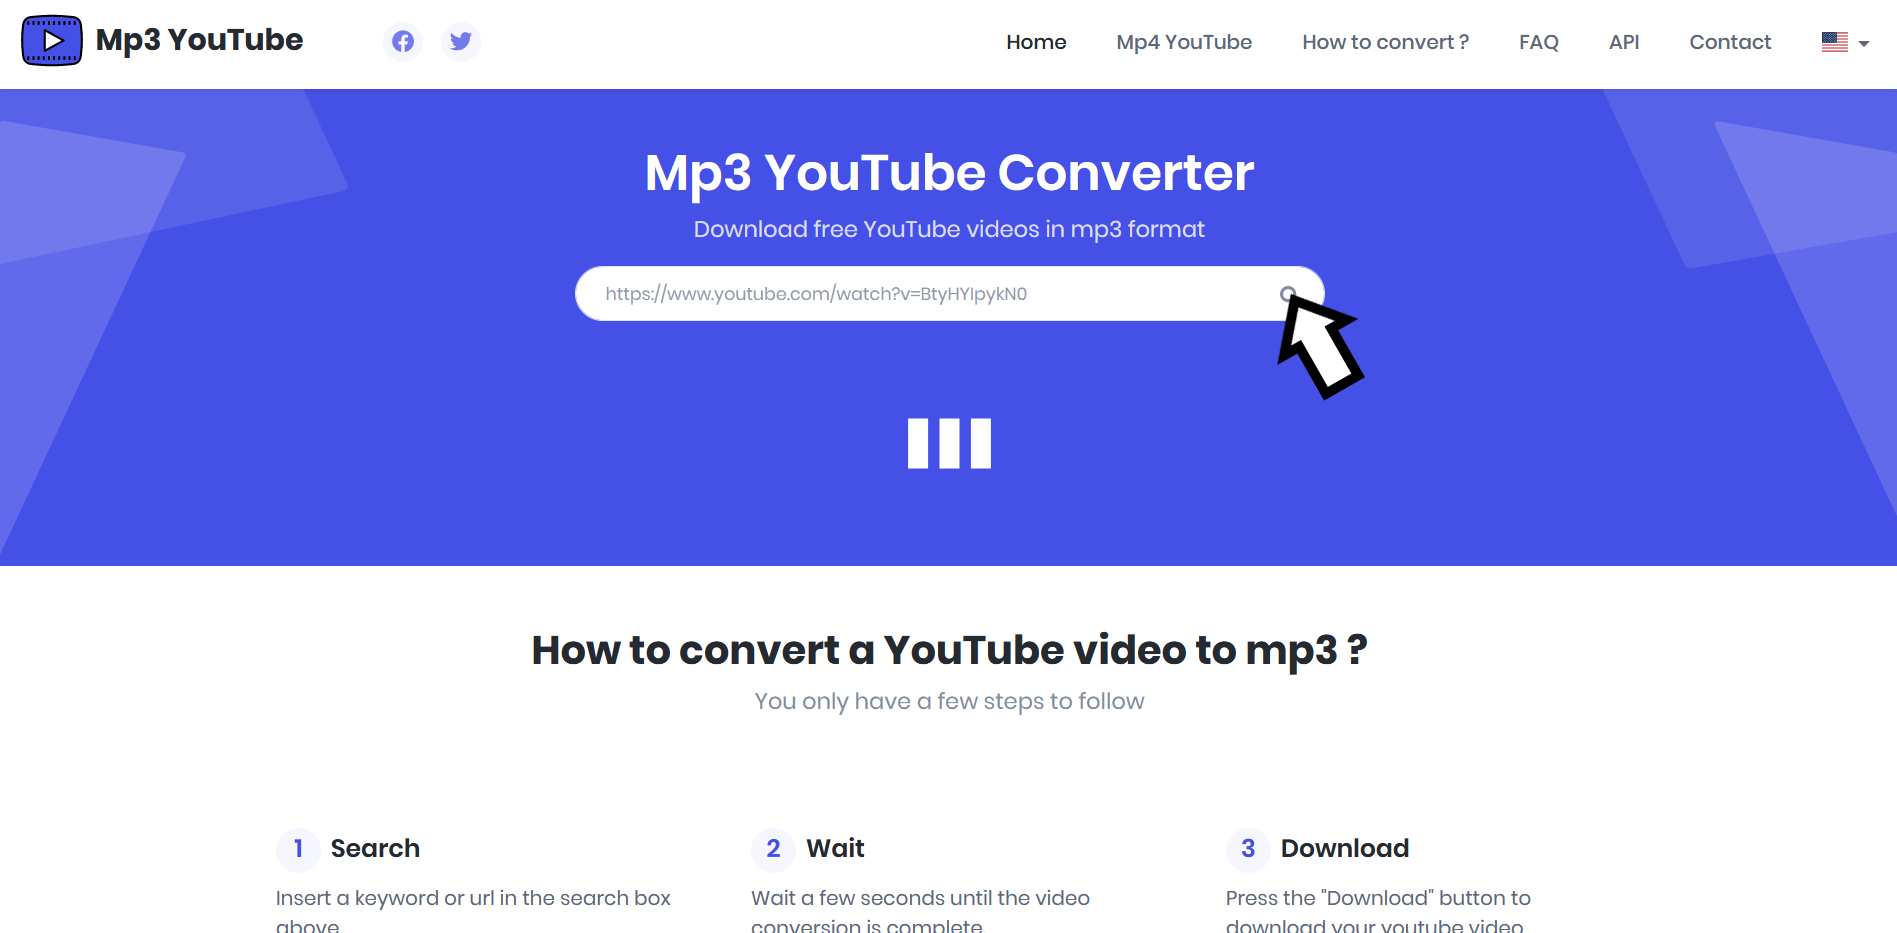 Converting a YouTube video